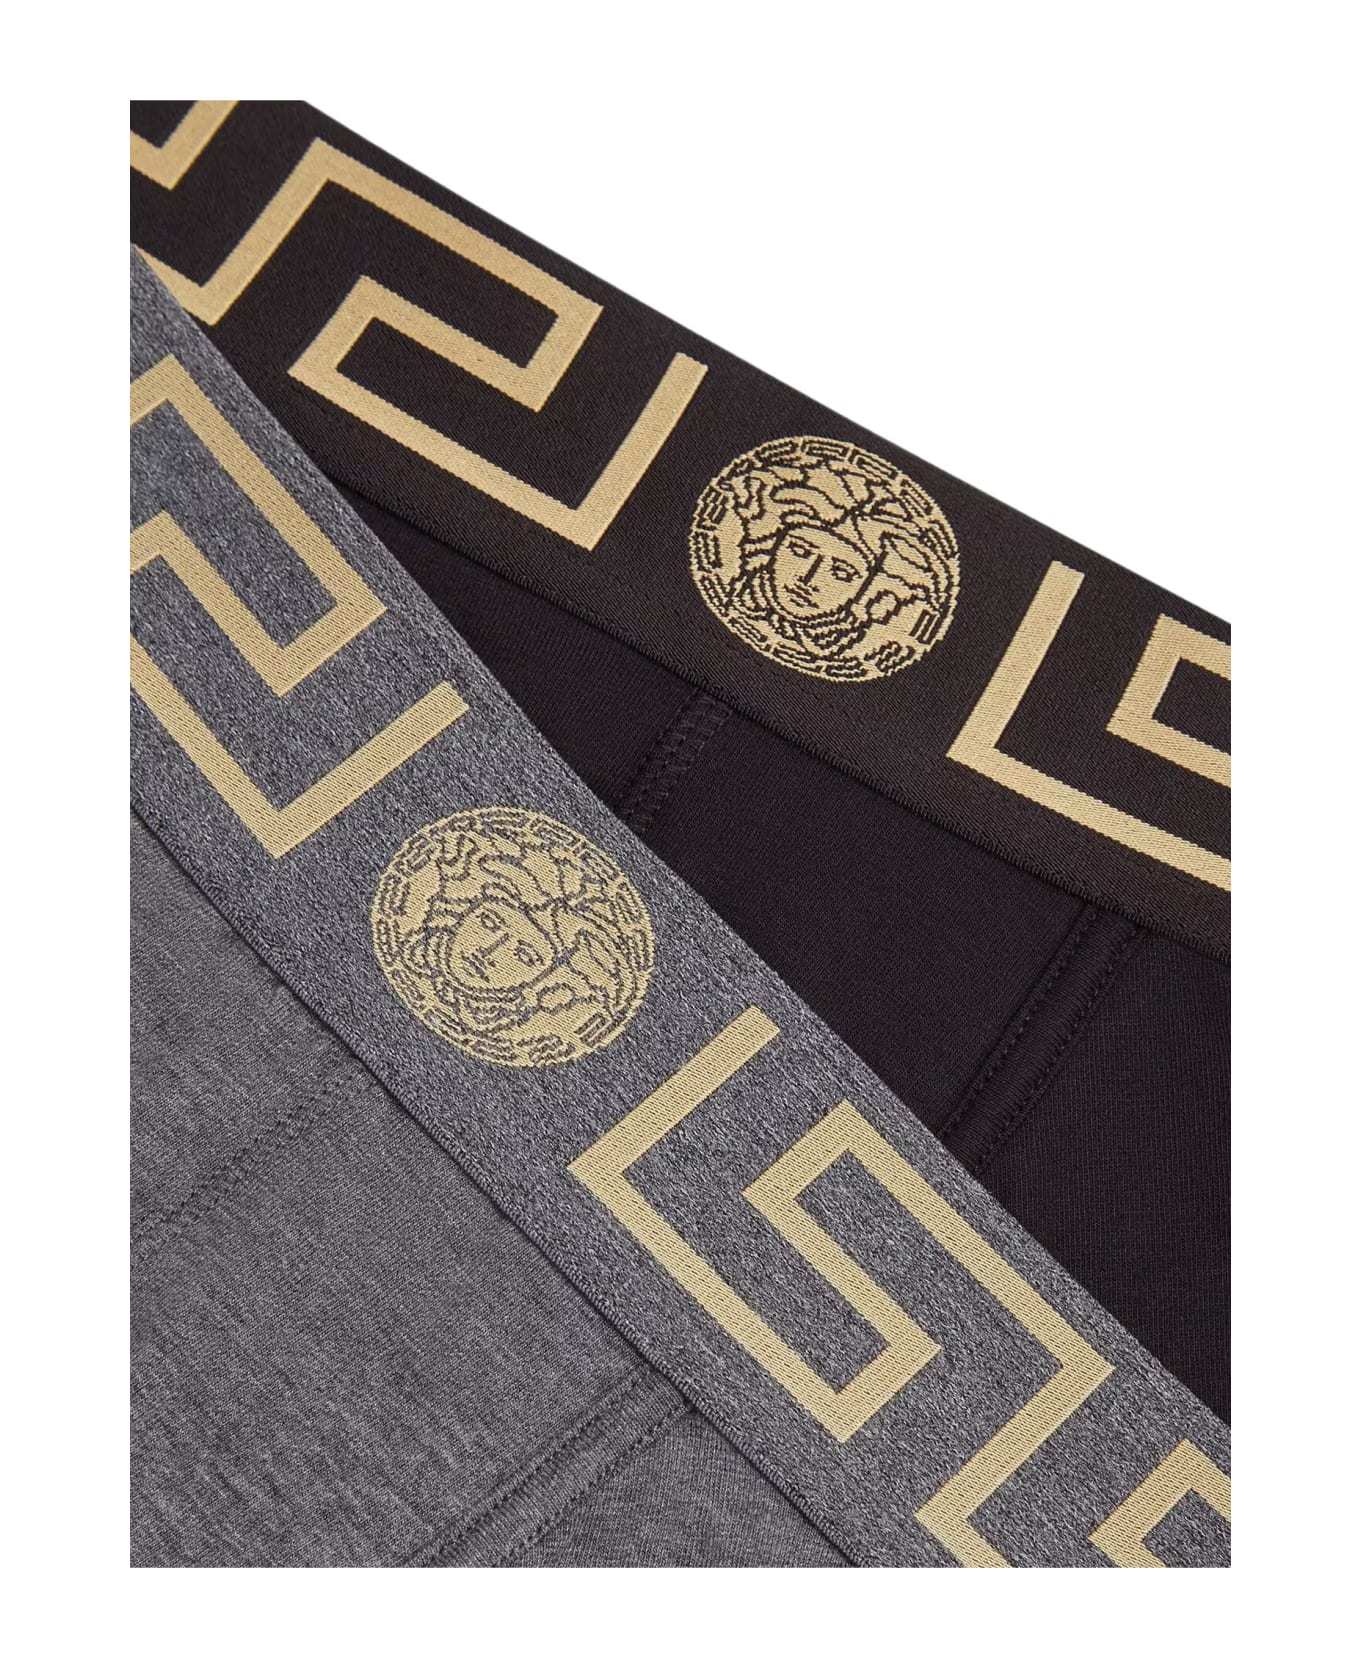 Versace Pack Of Two Boxer Shorts With Greek Motif - BK/GR ショーツ